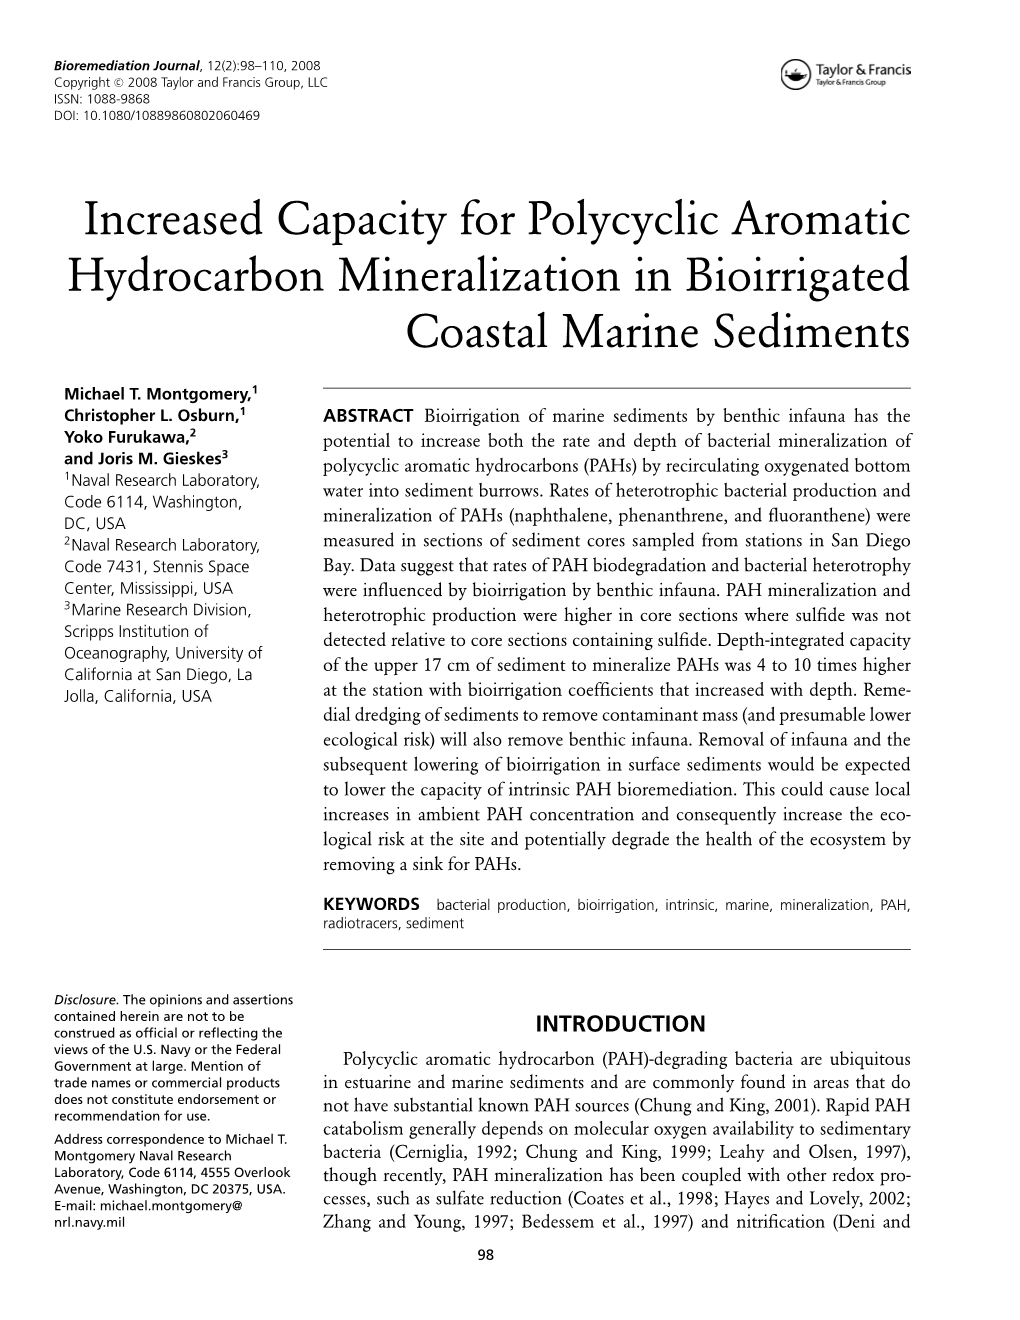 Increased Capacity for Polycyclic Aromatic Hydrocarbon Mineralization in Bioirrigated Coastal Marine Sediments